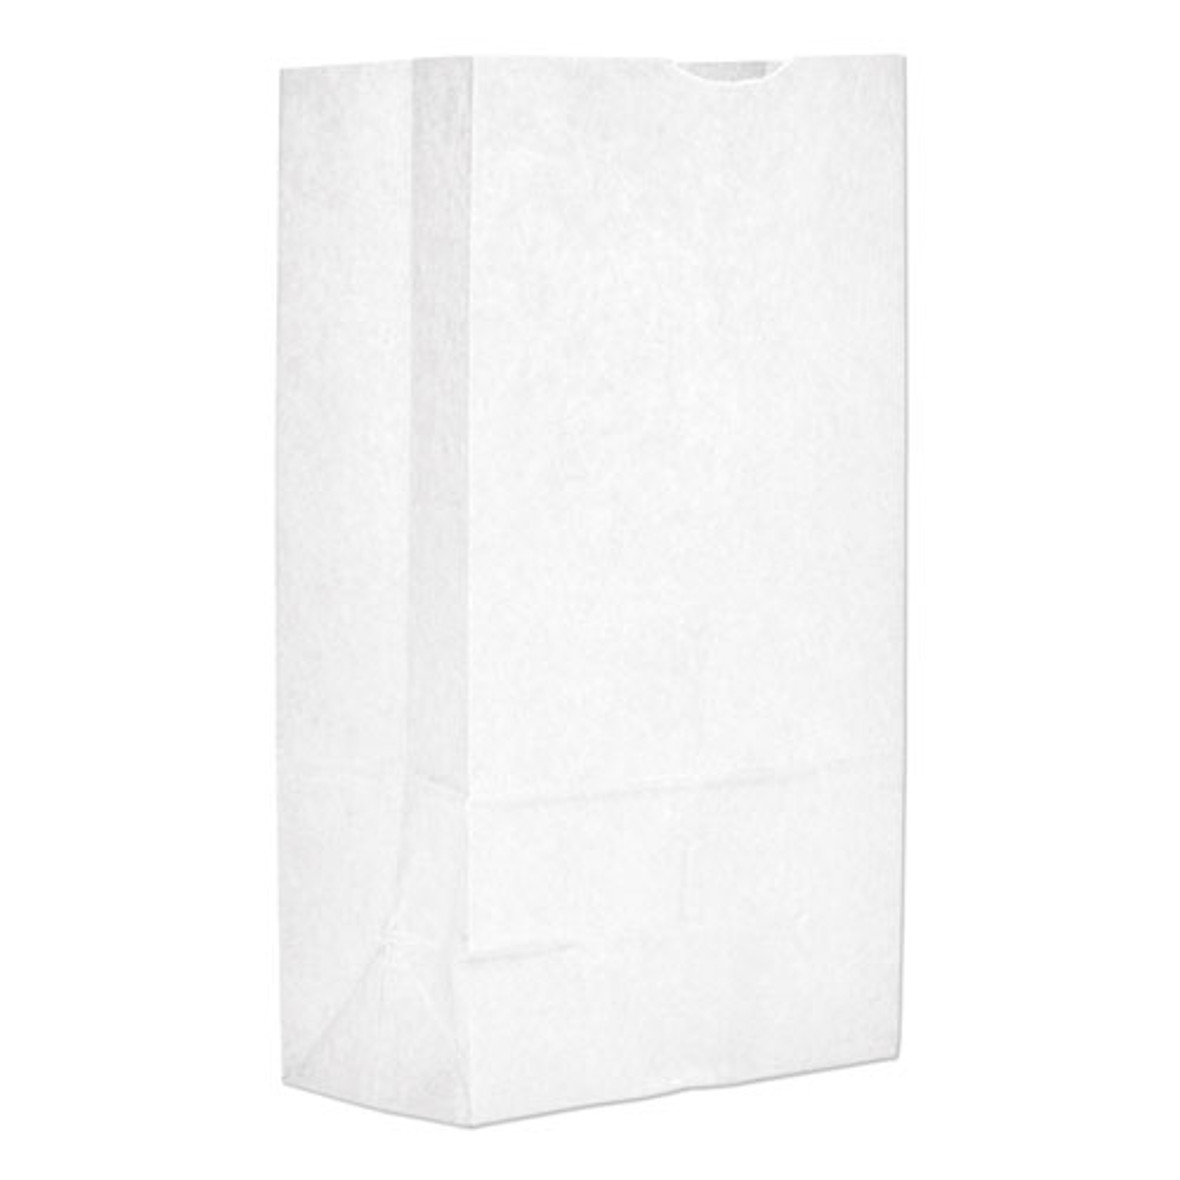 Grocery Paper Bags, 40 Lbs Capacity, #12, 7.06"w X 4.5"d X 13.75"h, White, 500 Bags